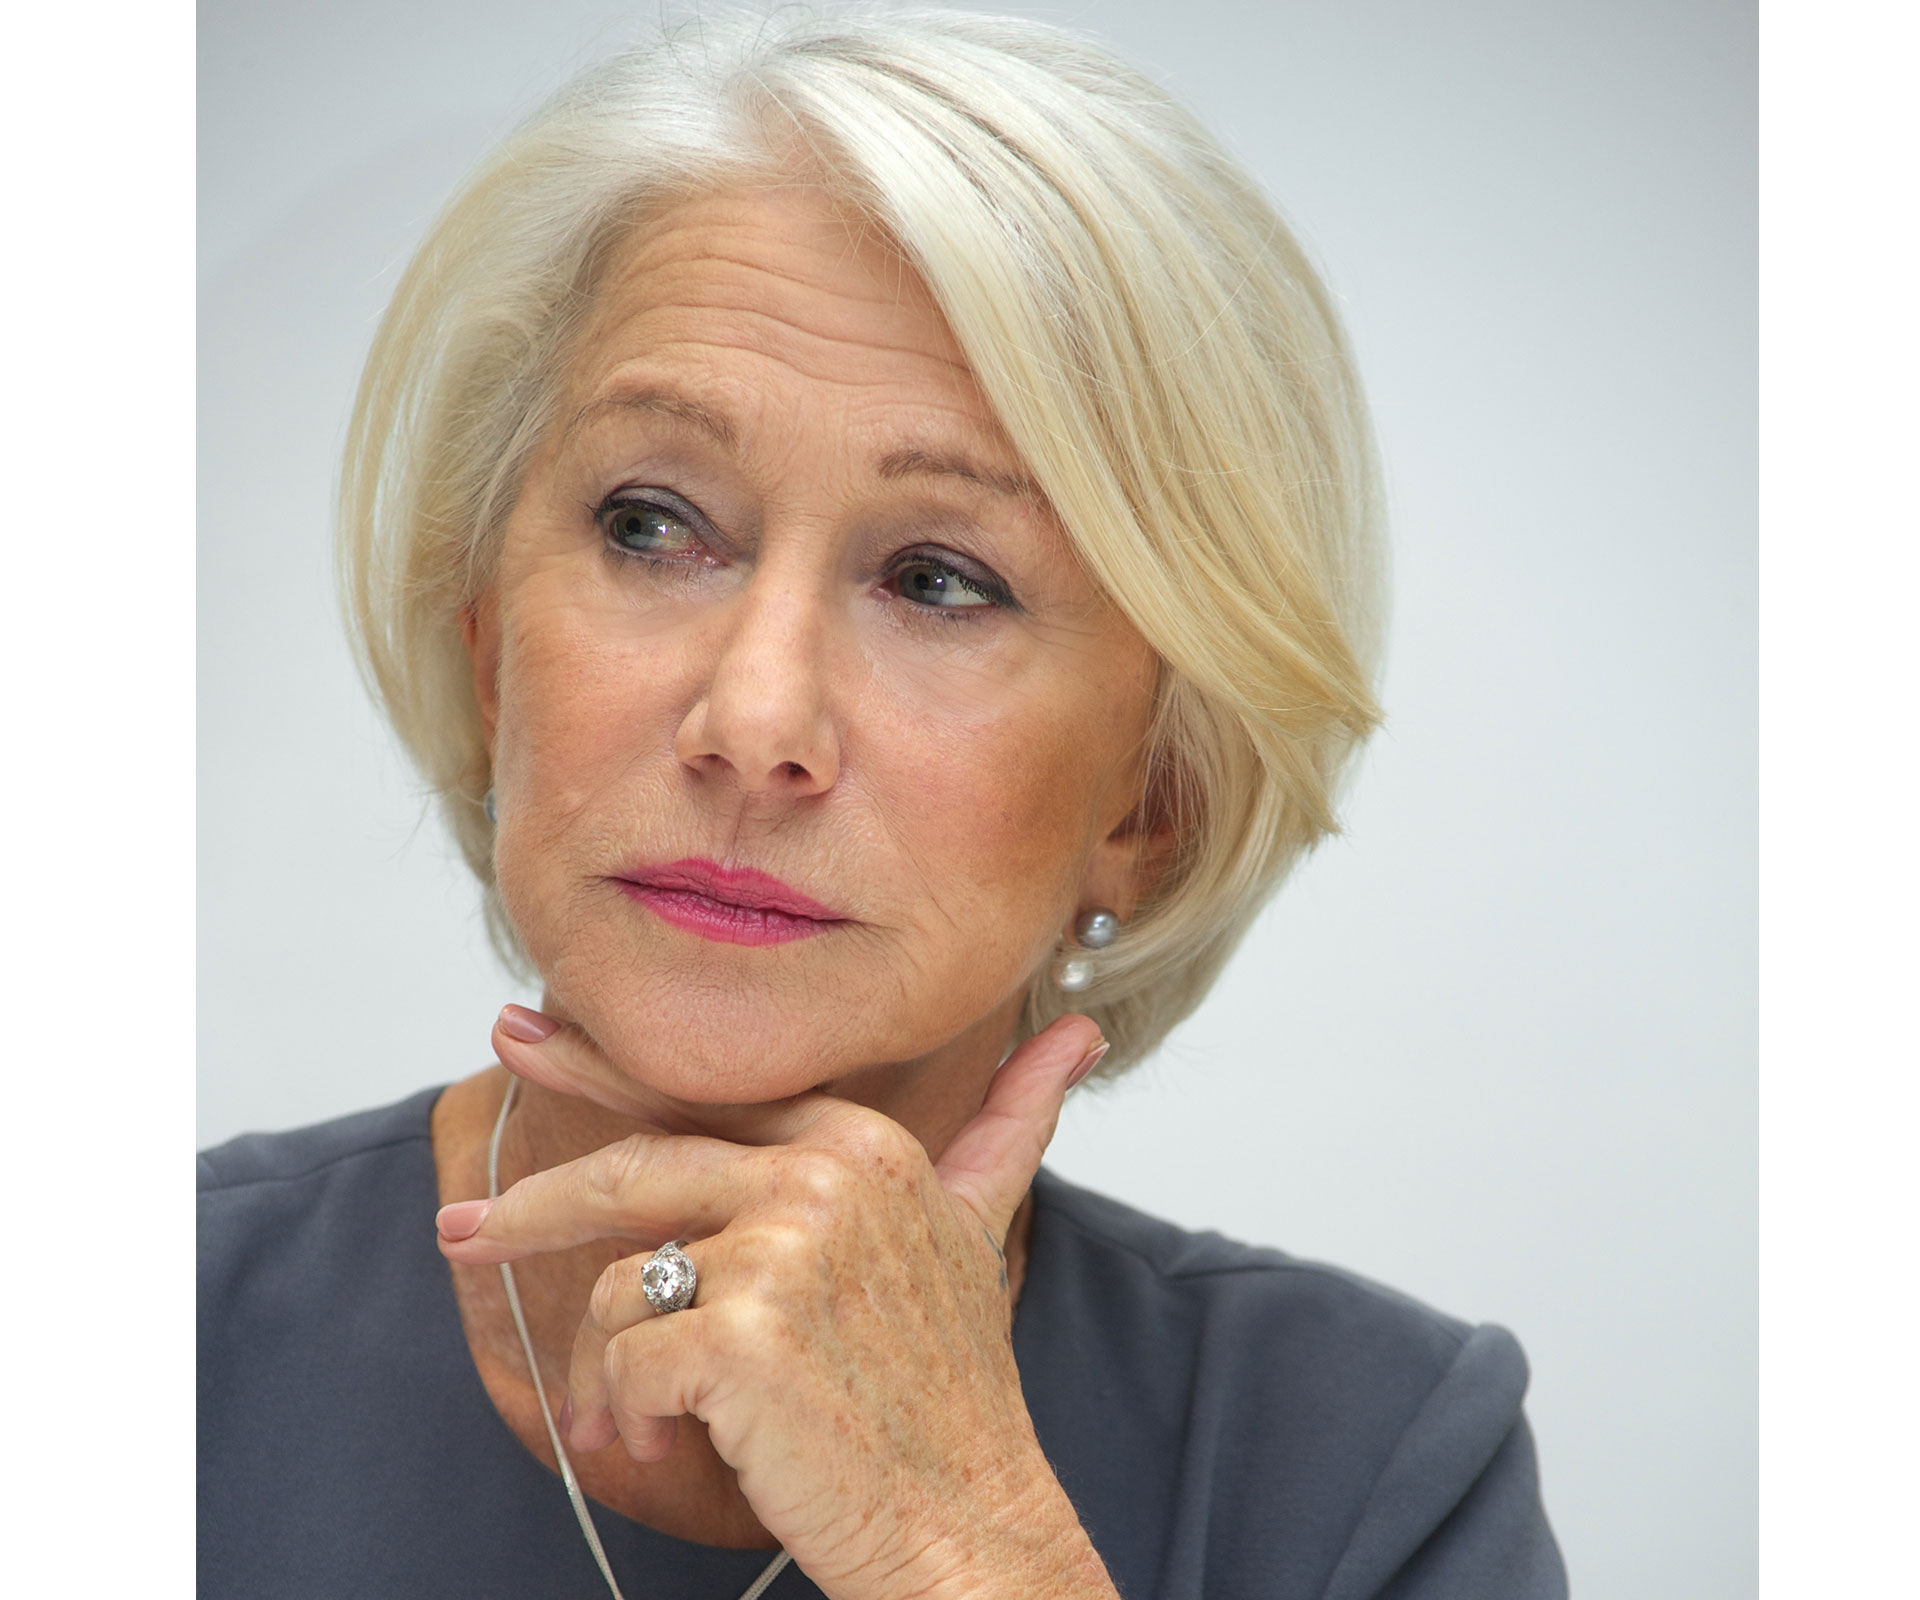 5 life lessons from Dame Helen Mirren